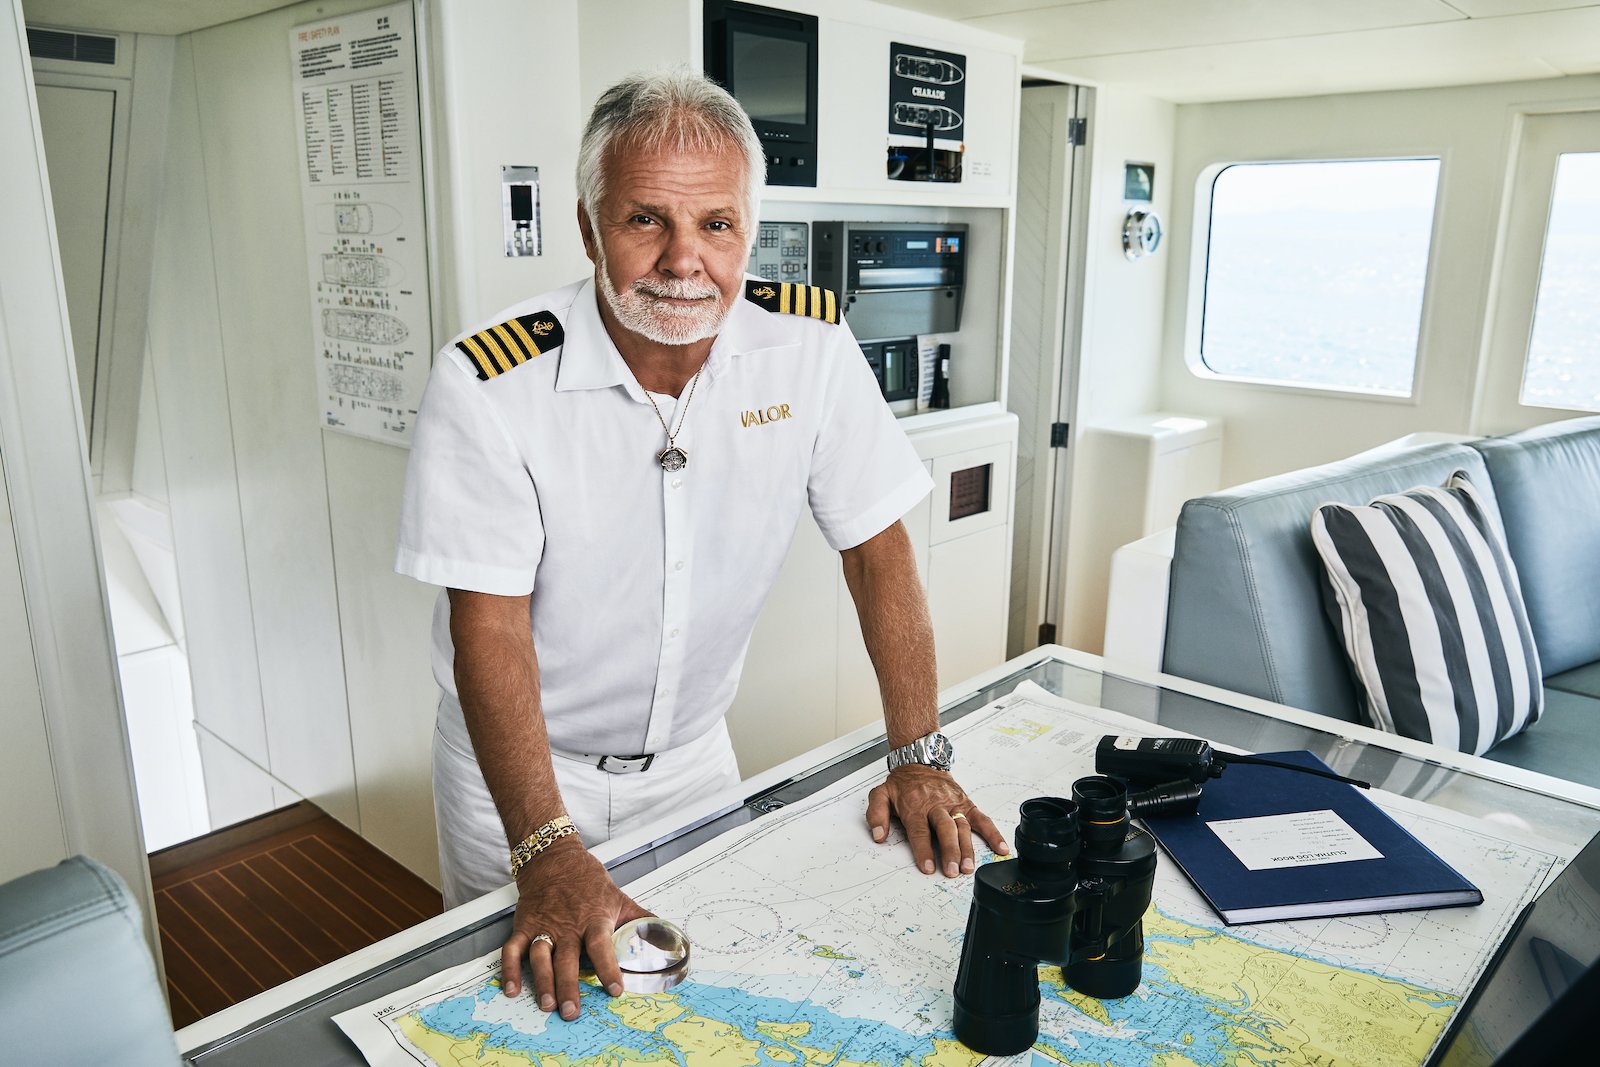 ‘Below Deck’: Captain Lee Expresses Shock Over the Season – ‘She Really Didn’t Just Say That Did She?’